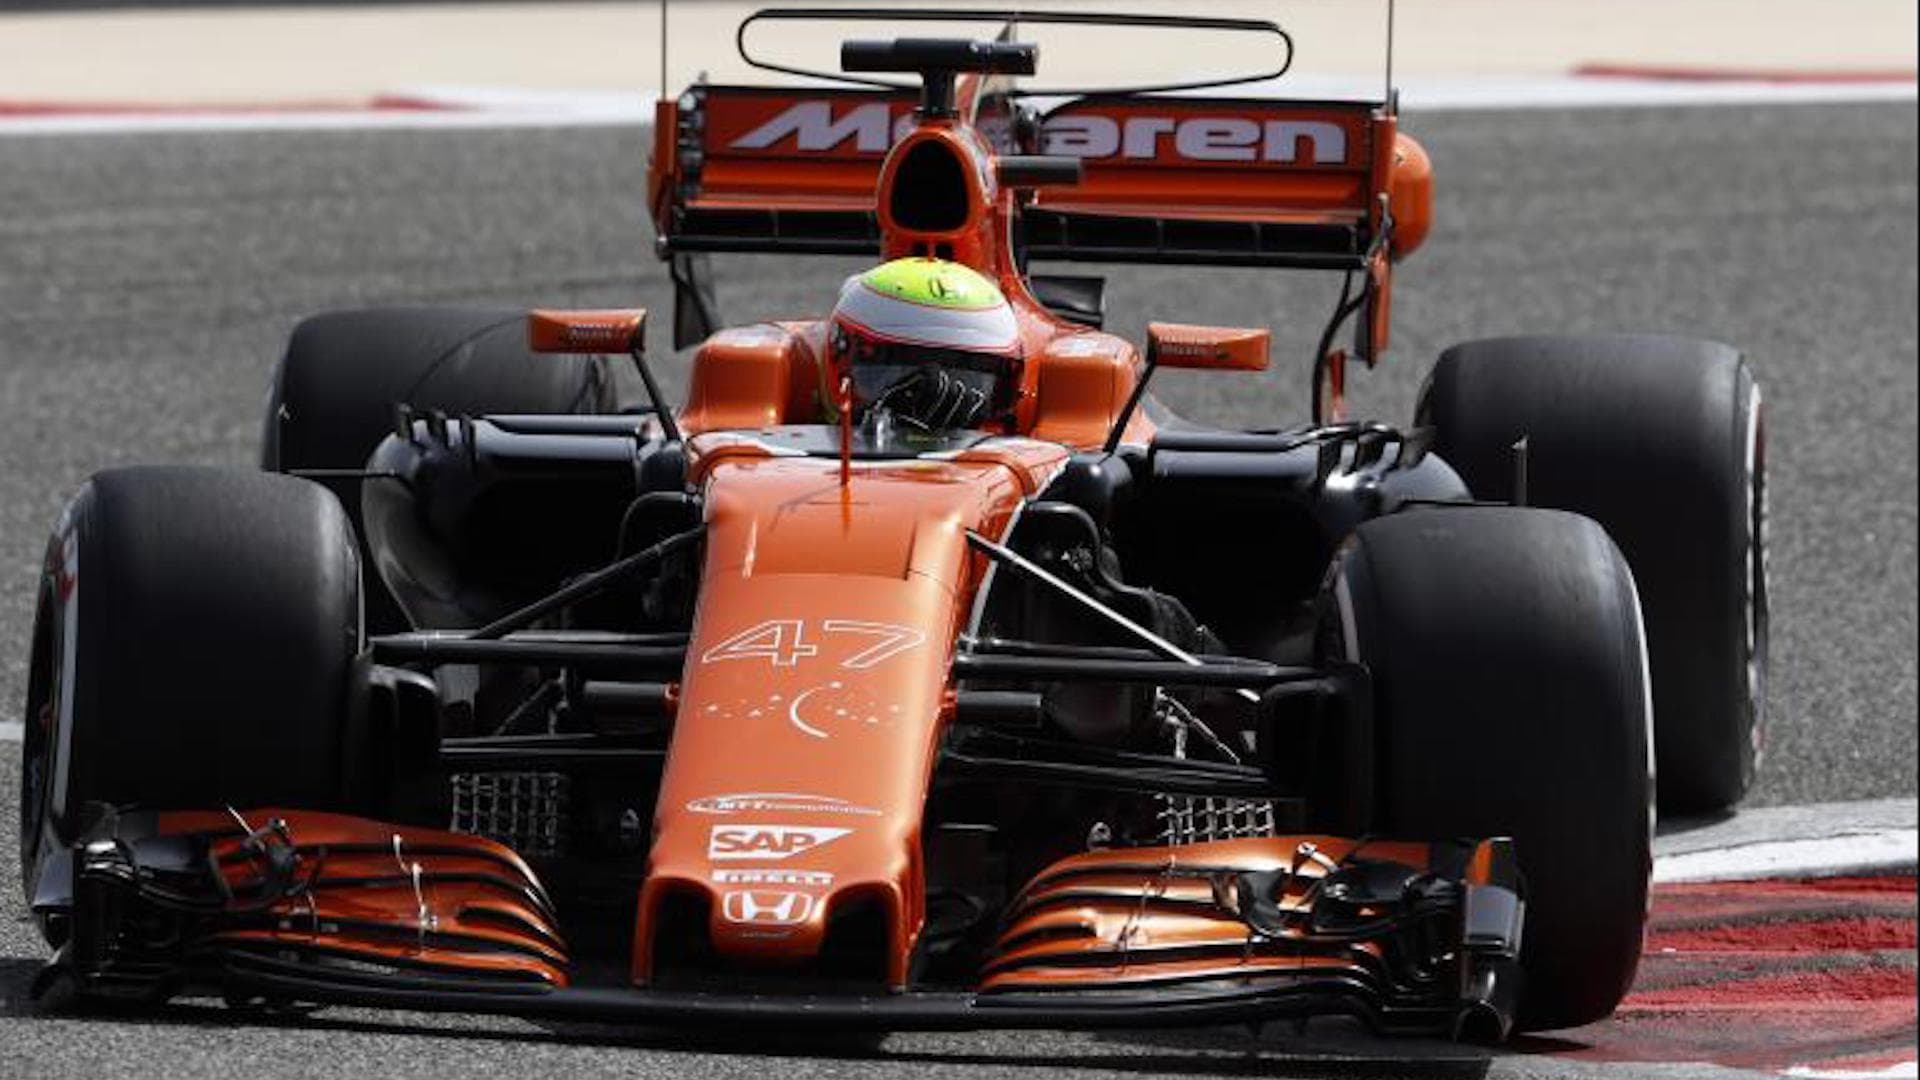 Here’s the First Firing of McLaren’s New Renault-Powered F1 Car